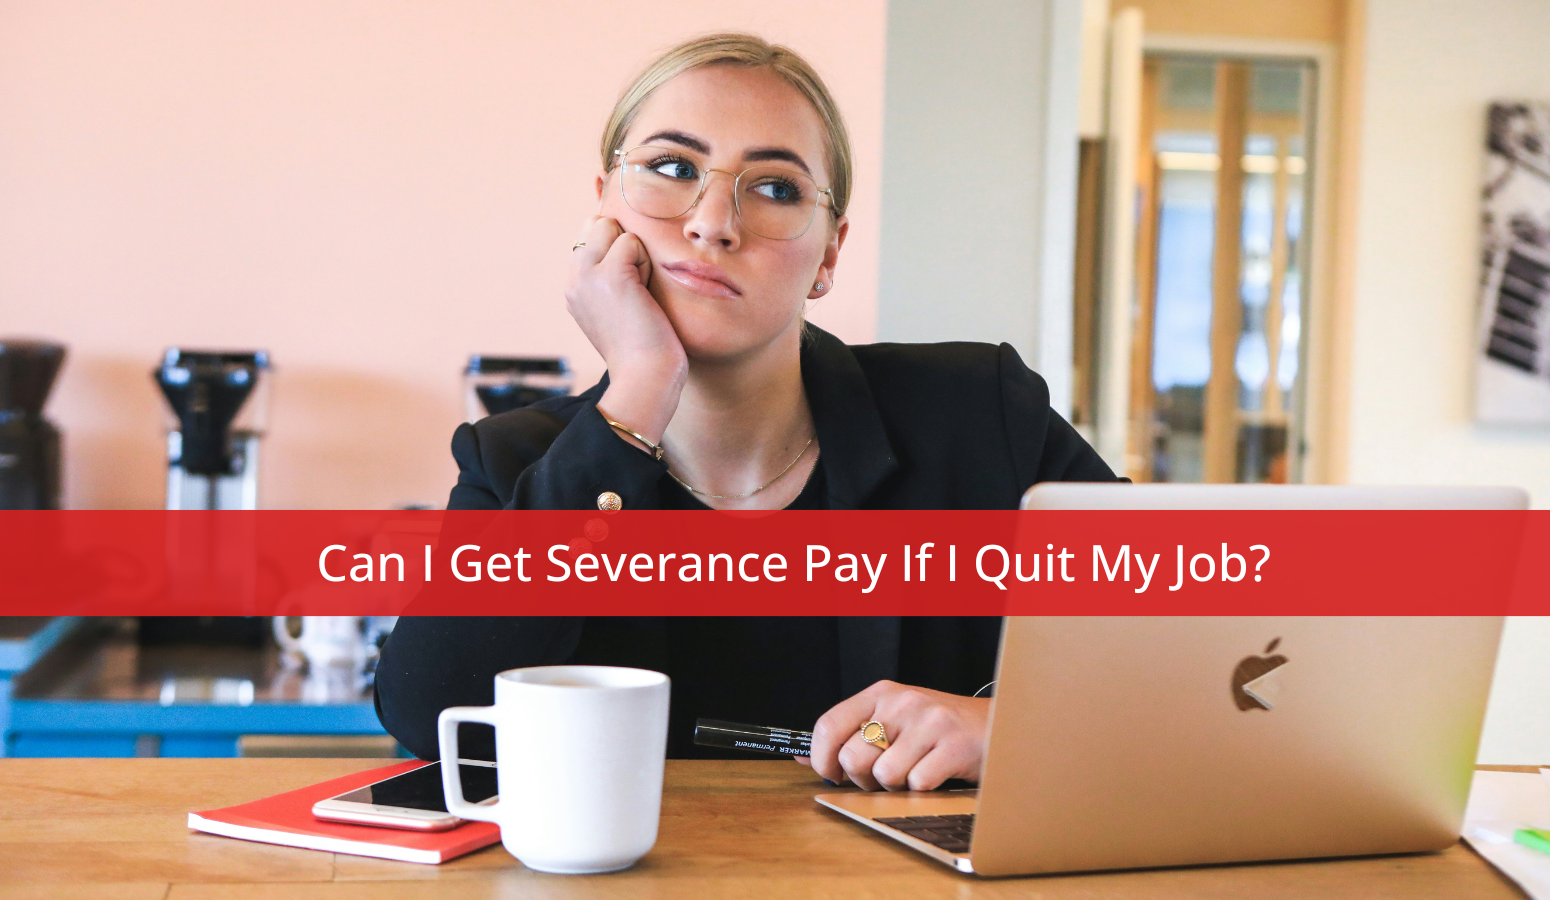 Featured image for “Can I Get Severance Pay If I Quit My Job?”